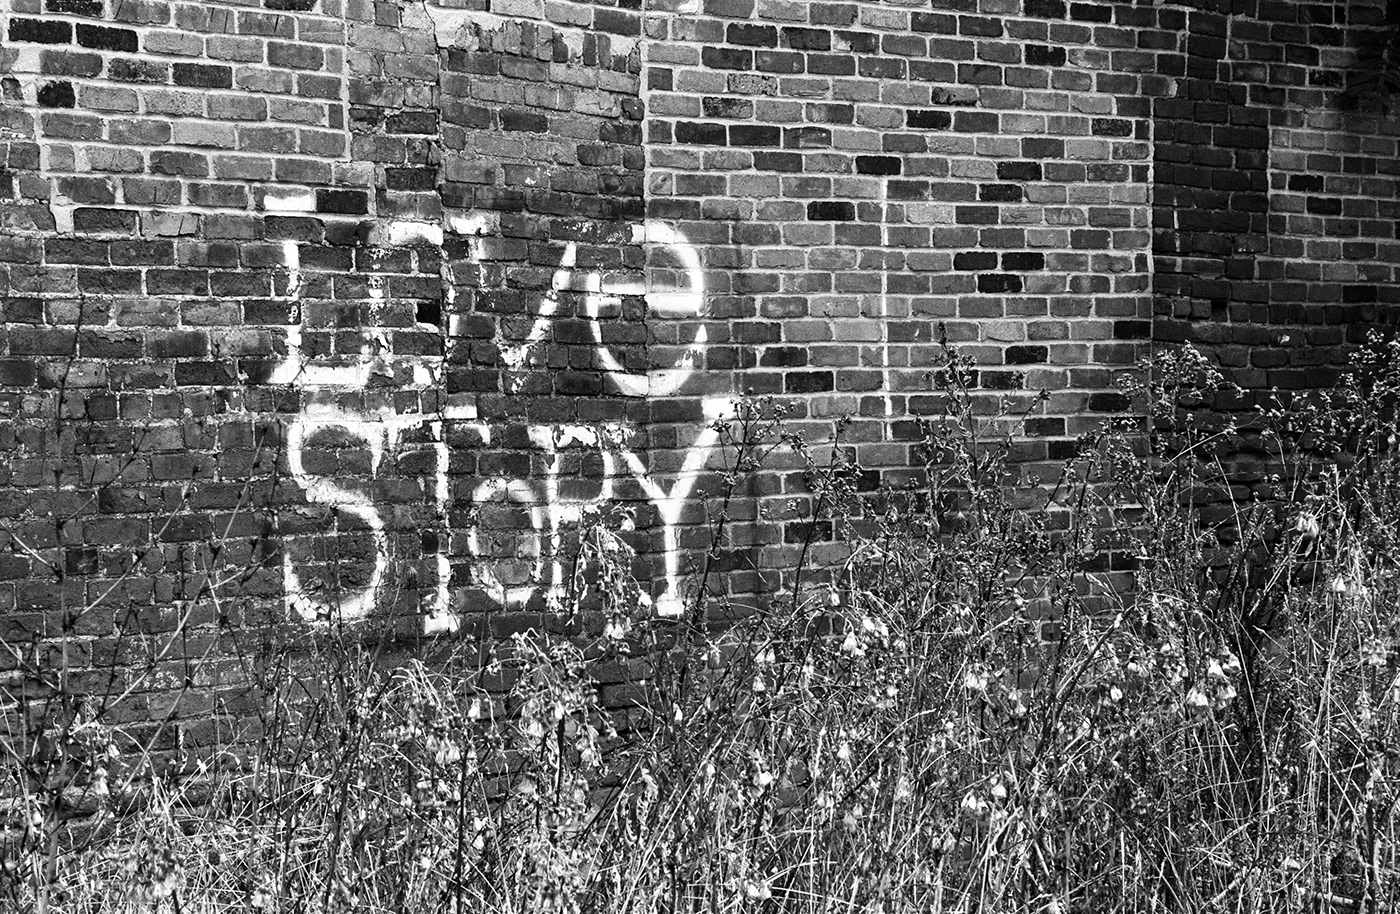 "Love Story" painted on a wall in Detroit, Michigan.